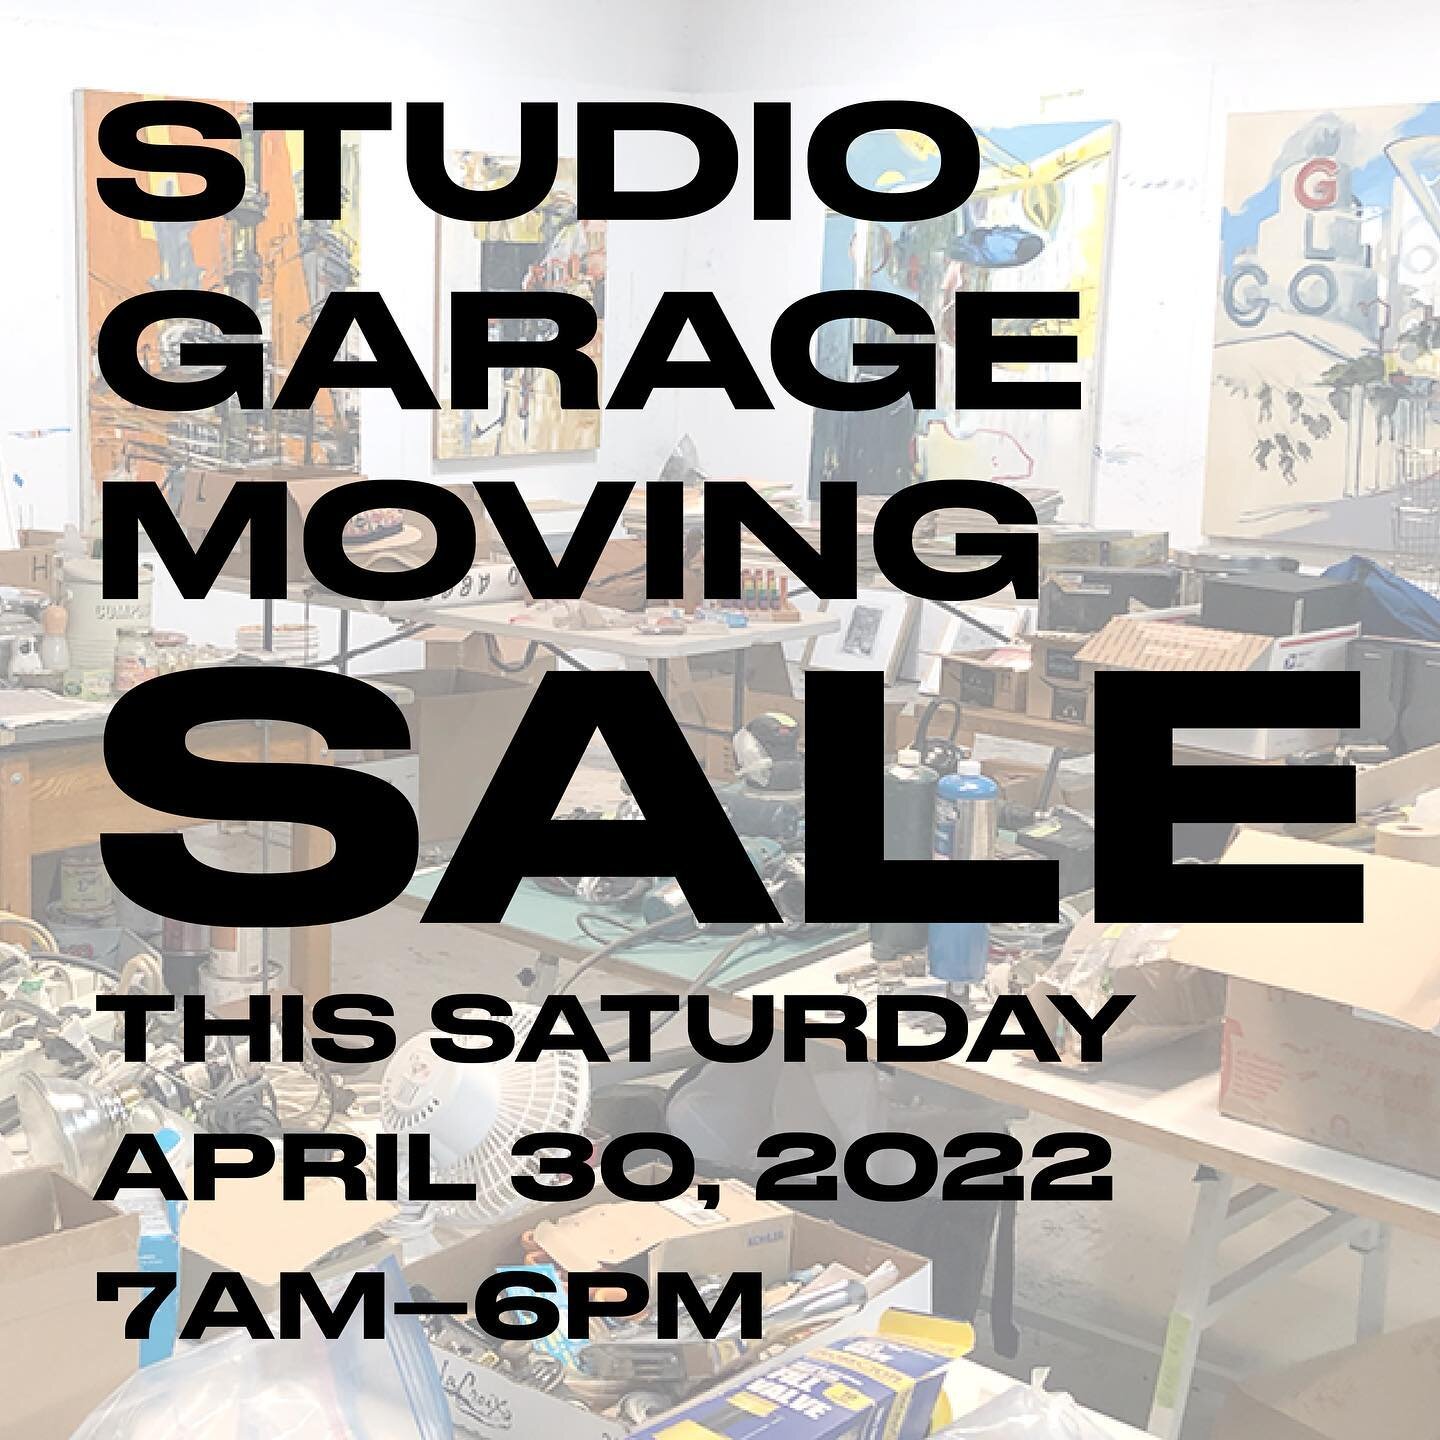 5 creative families, 1 massive sale, 1 day only.
--
Saturday, April 30th
7am to 6pm
--
2003 Brundrette
Dallas, TX 75208
--
You name it, we probably have it!
&bull; power tools large and small
&bull; hand tools
&bull; electronics
&bull; appliances
&bu